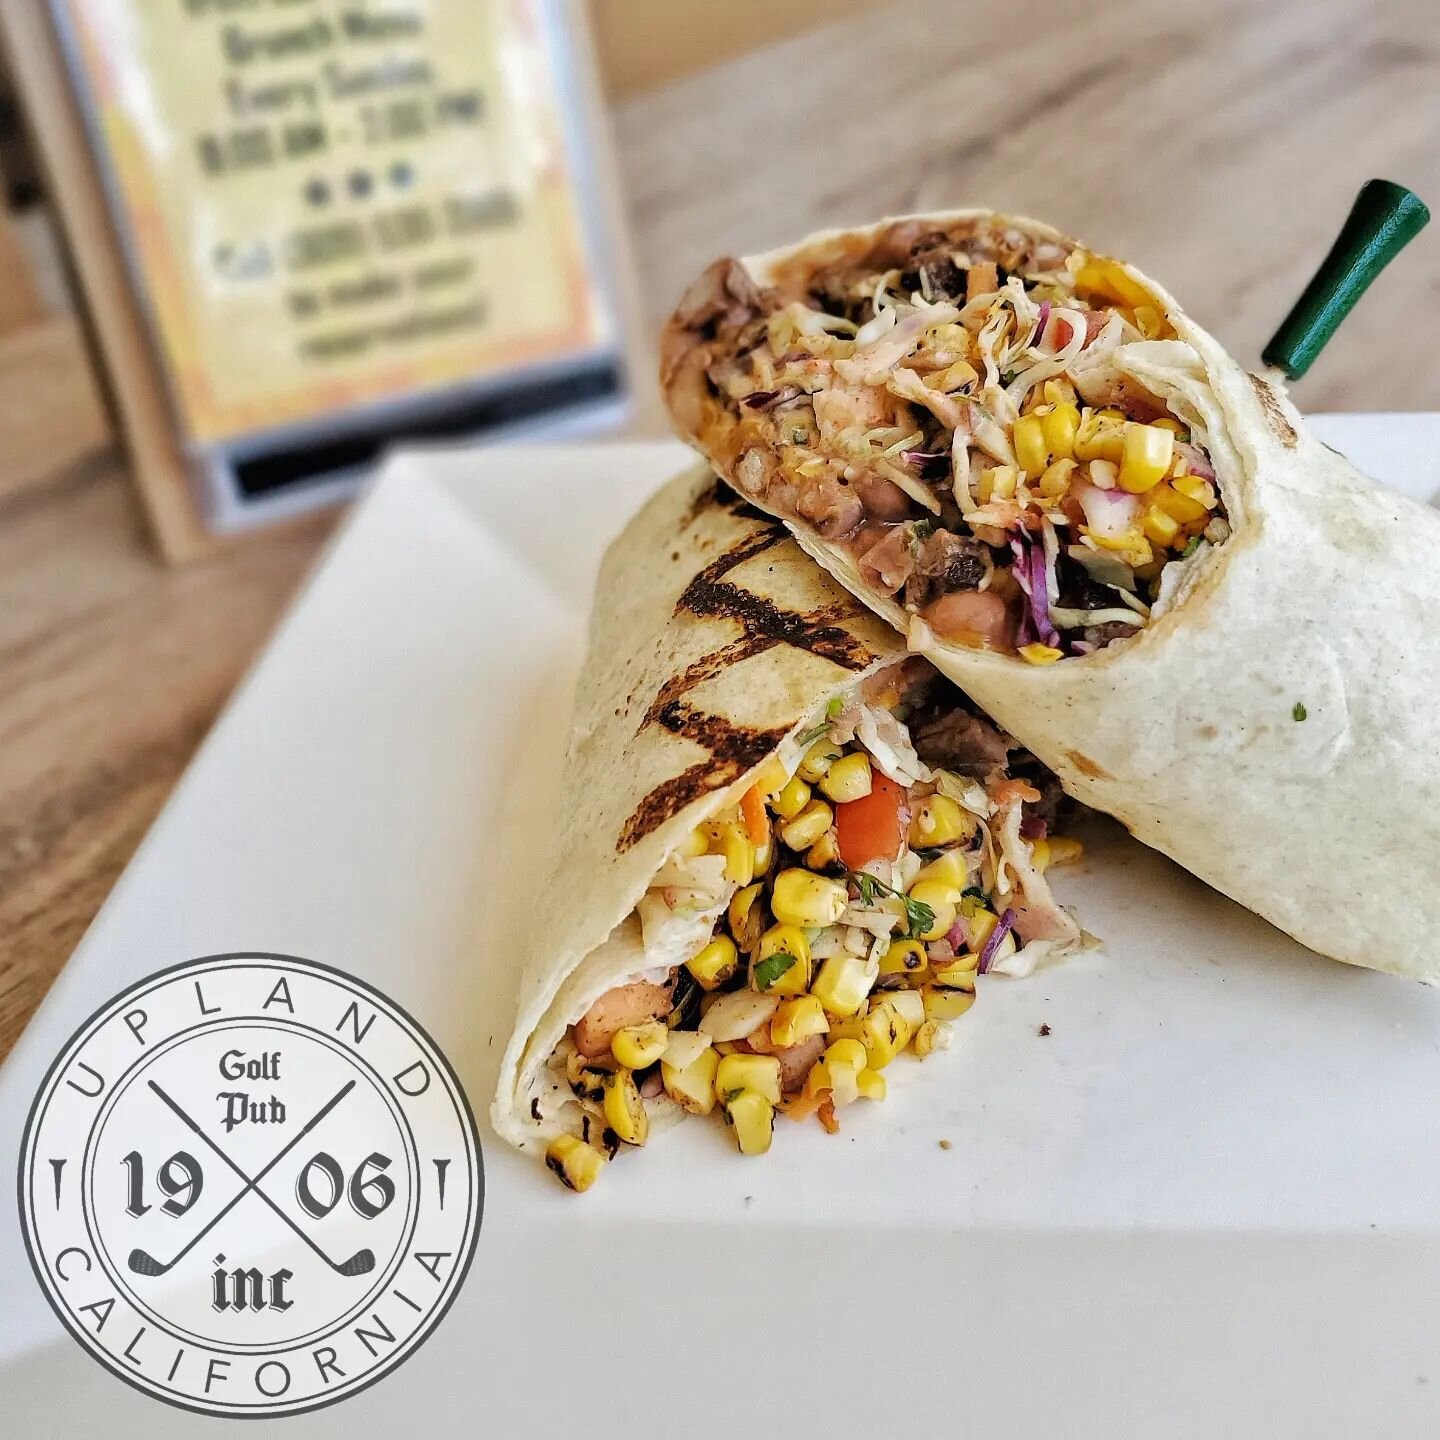 Come on in and join us for Taco Tuesday! You won't want to miss our special tonight: Grilled Tri-Tip Burrito!!
&bull;
&bull;
&bull;
Juicy chunks of grilled Tri-Tip steak with refried beans, cabbage slaw, tomatillo crema, and a fire roasted corn salsa